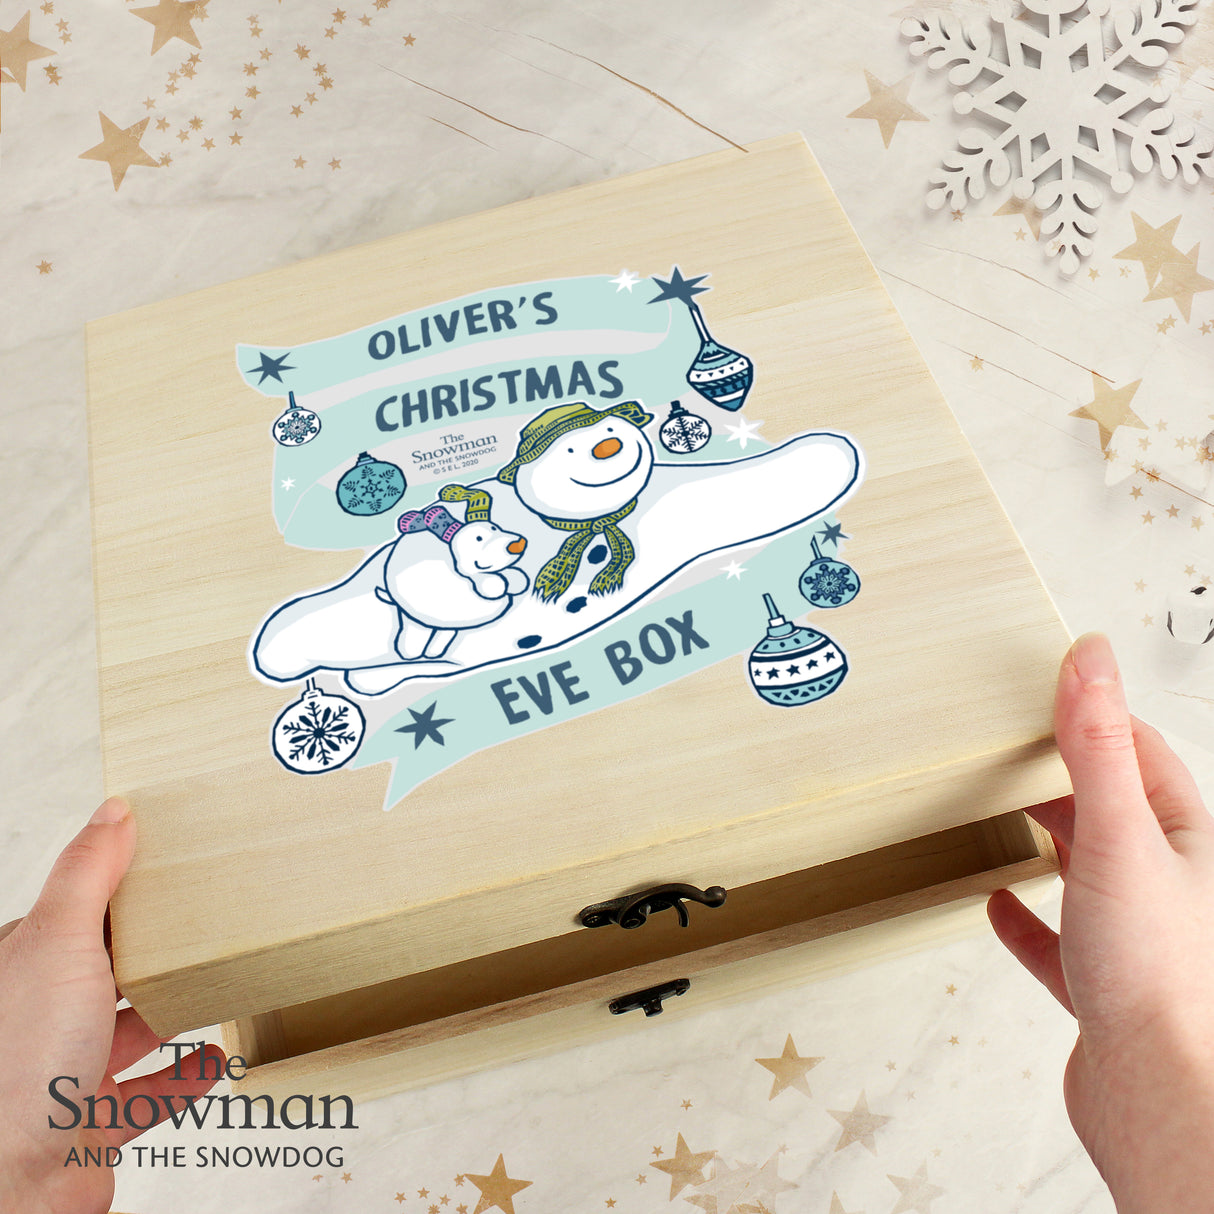 The Snowman and Snowdog Christmas Eve Box - Gift Moments